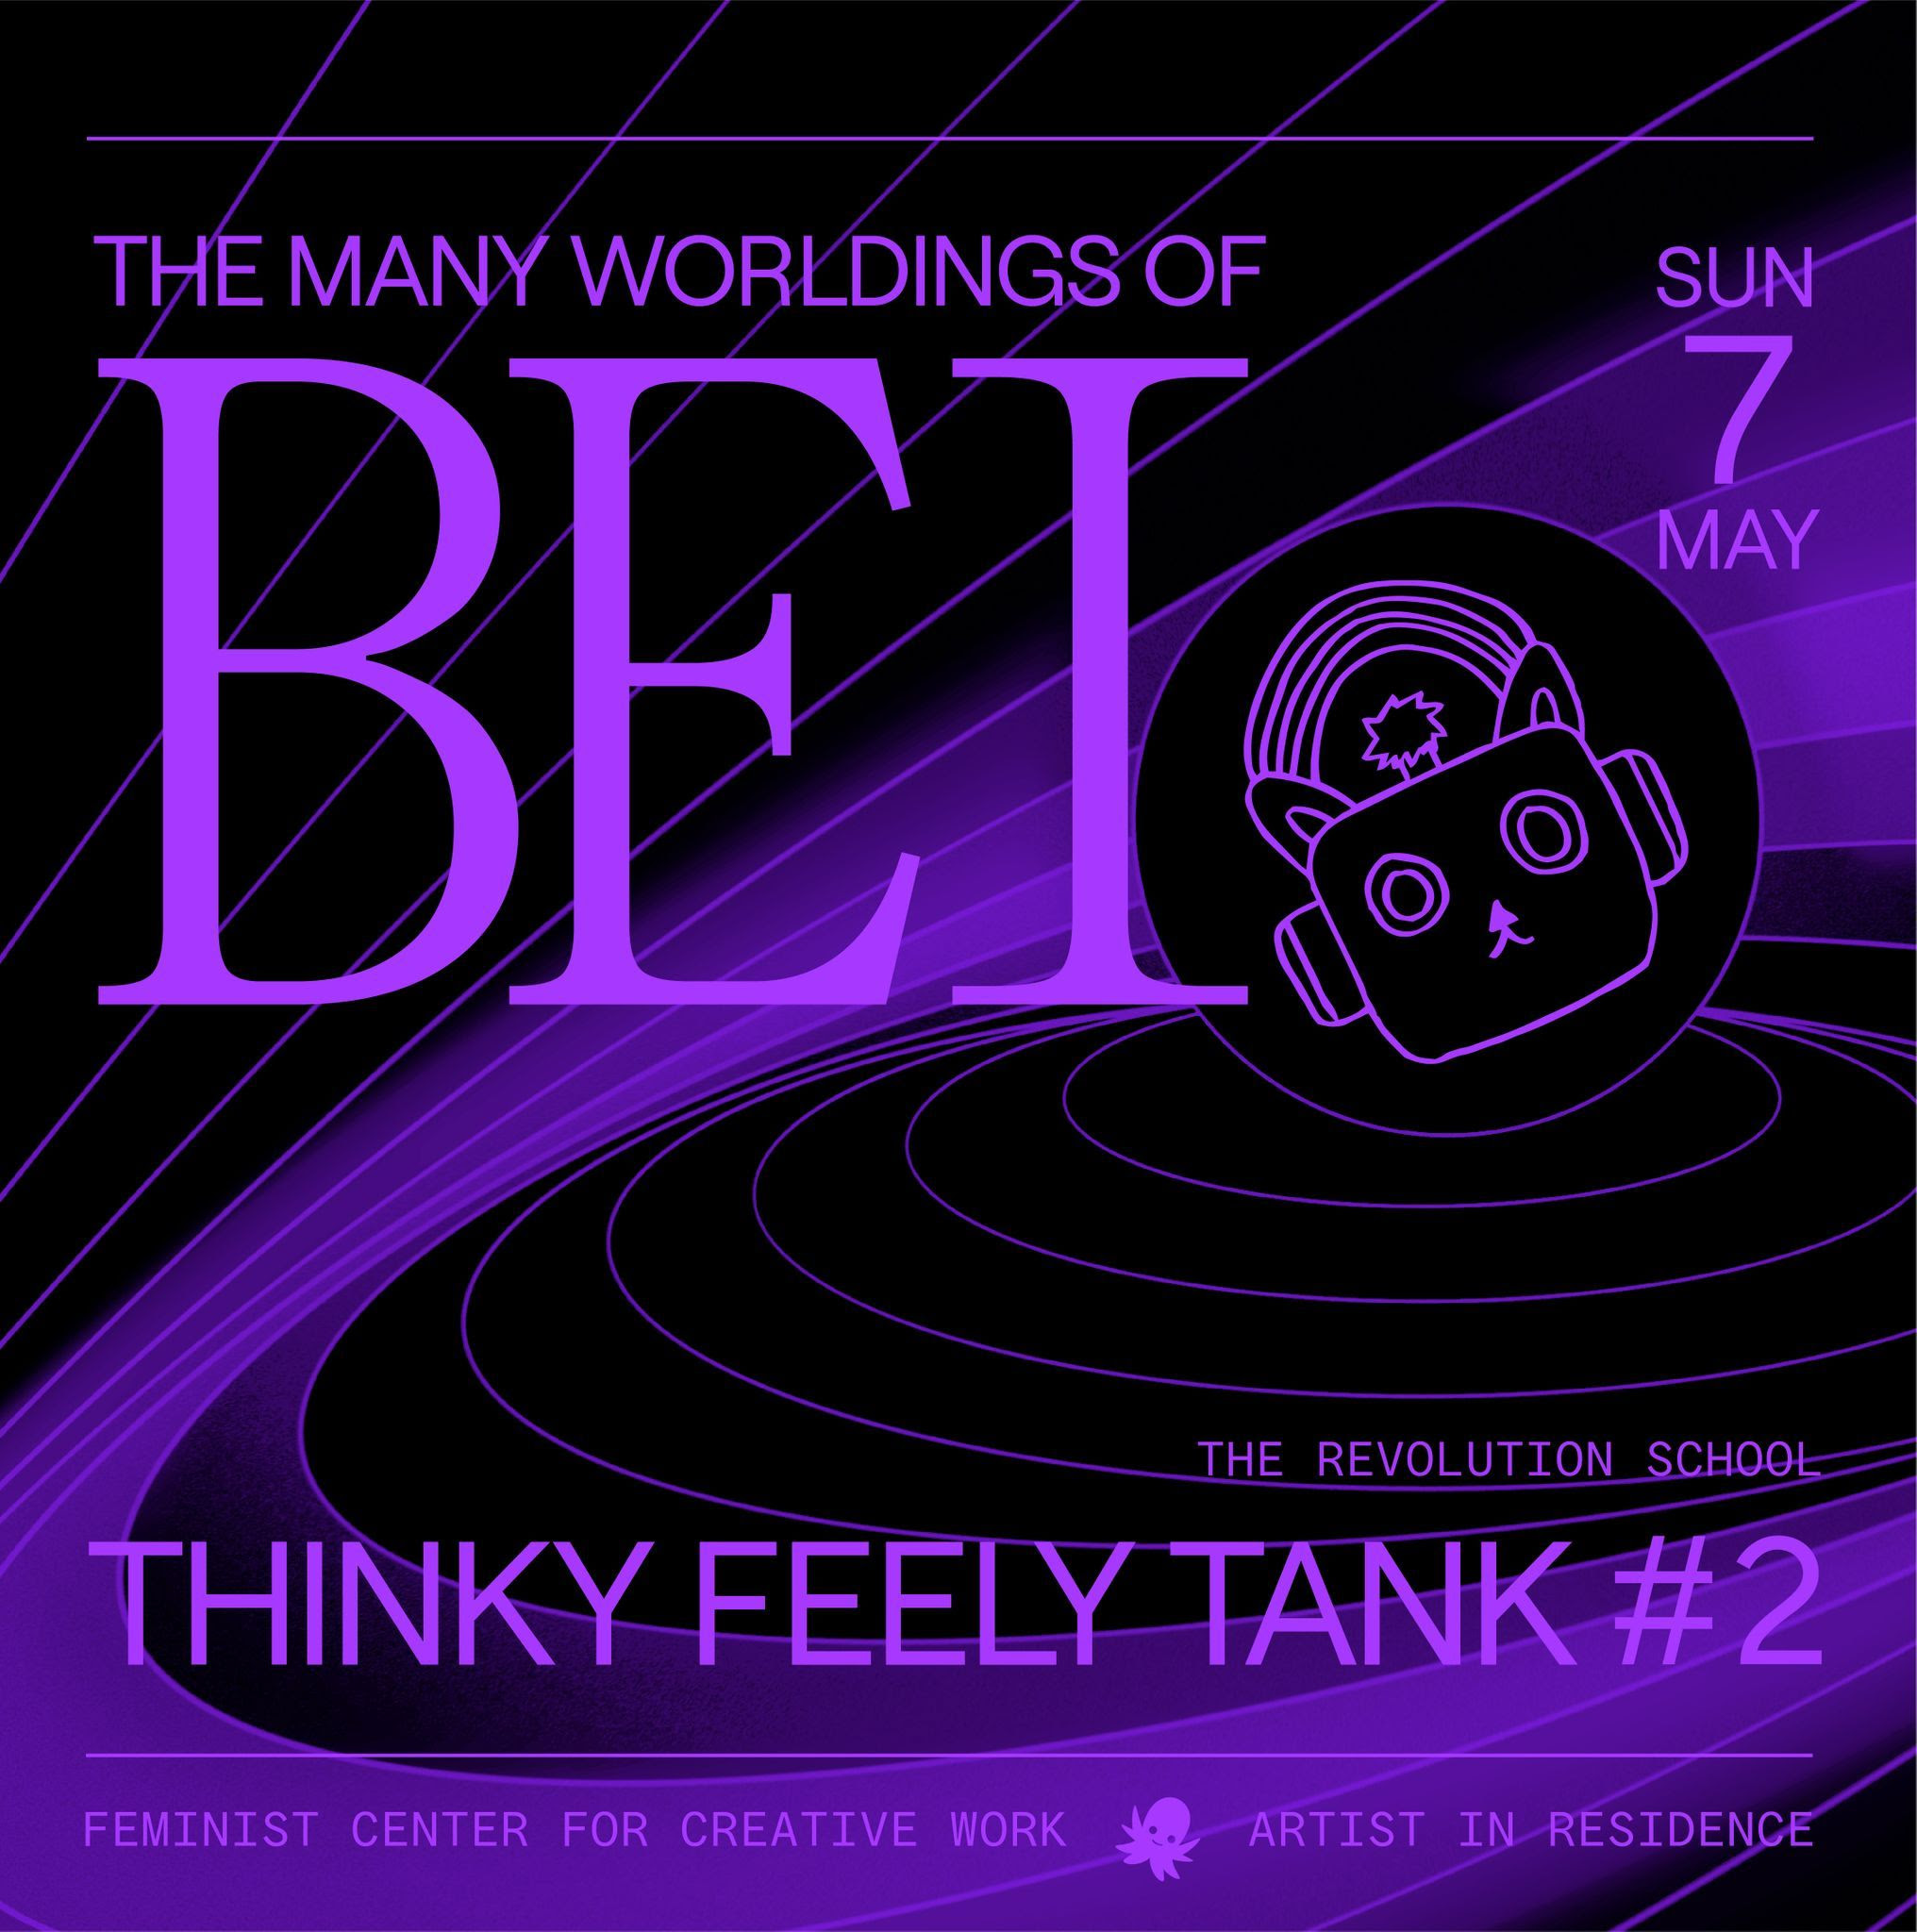 A cat robot head with a rainbow connecting its ears orbits through purple concentric circles against a black background. In all caps and in purple letters, the following text appears on the flier: "THE MANY WORLDINGS OF BEI, SUN MAY 7, THE REVOLUTION SCHOOL, THINKY FEELY TANK #2, FEMINIST CENTER FOR CREATIVE WORK, ARTIST IN RESIDENCE